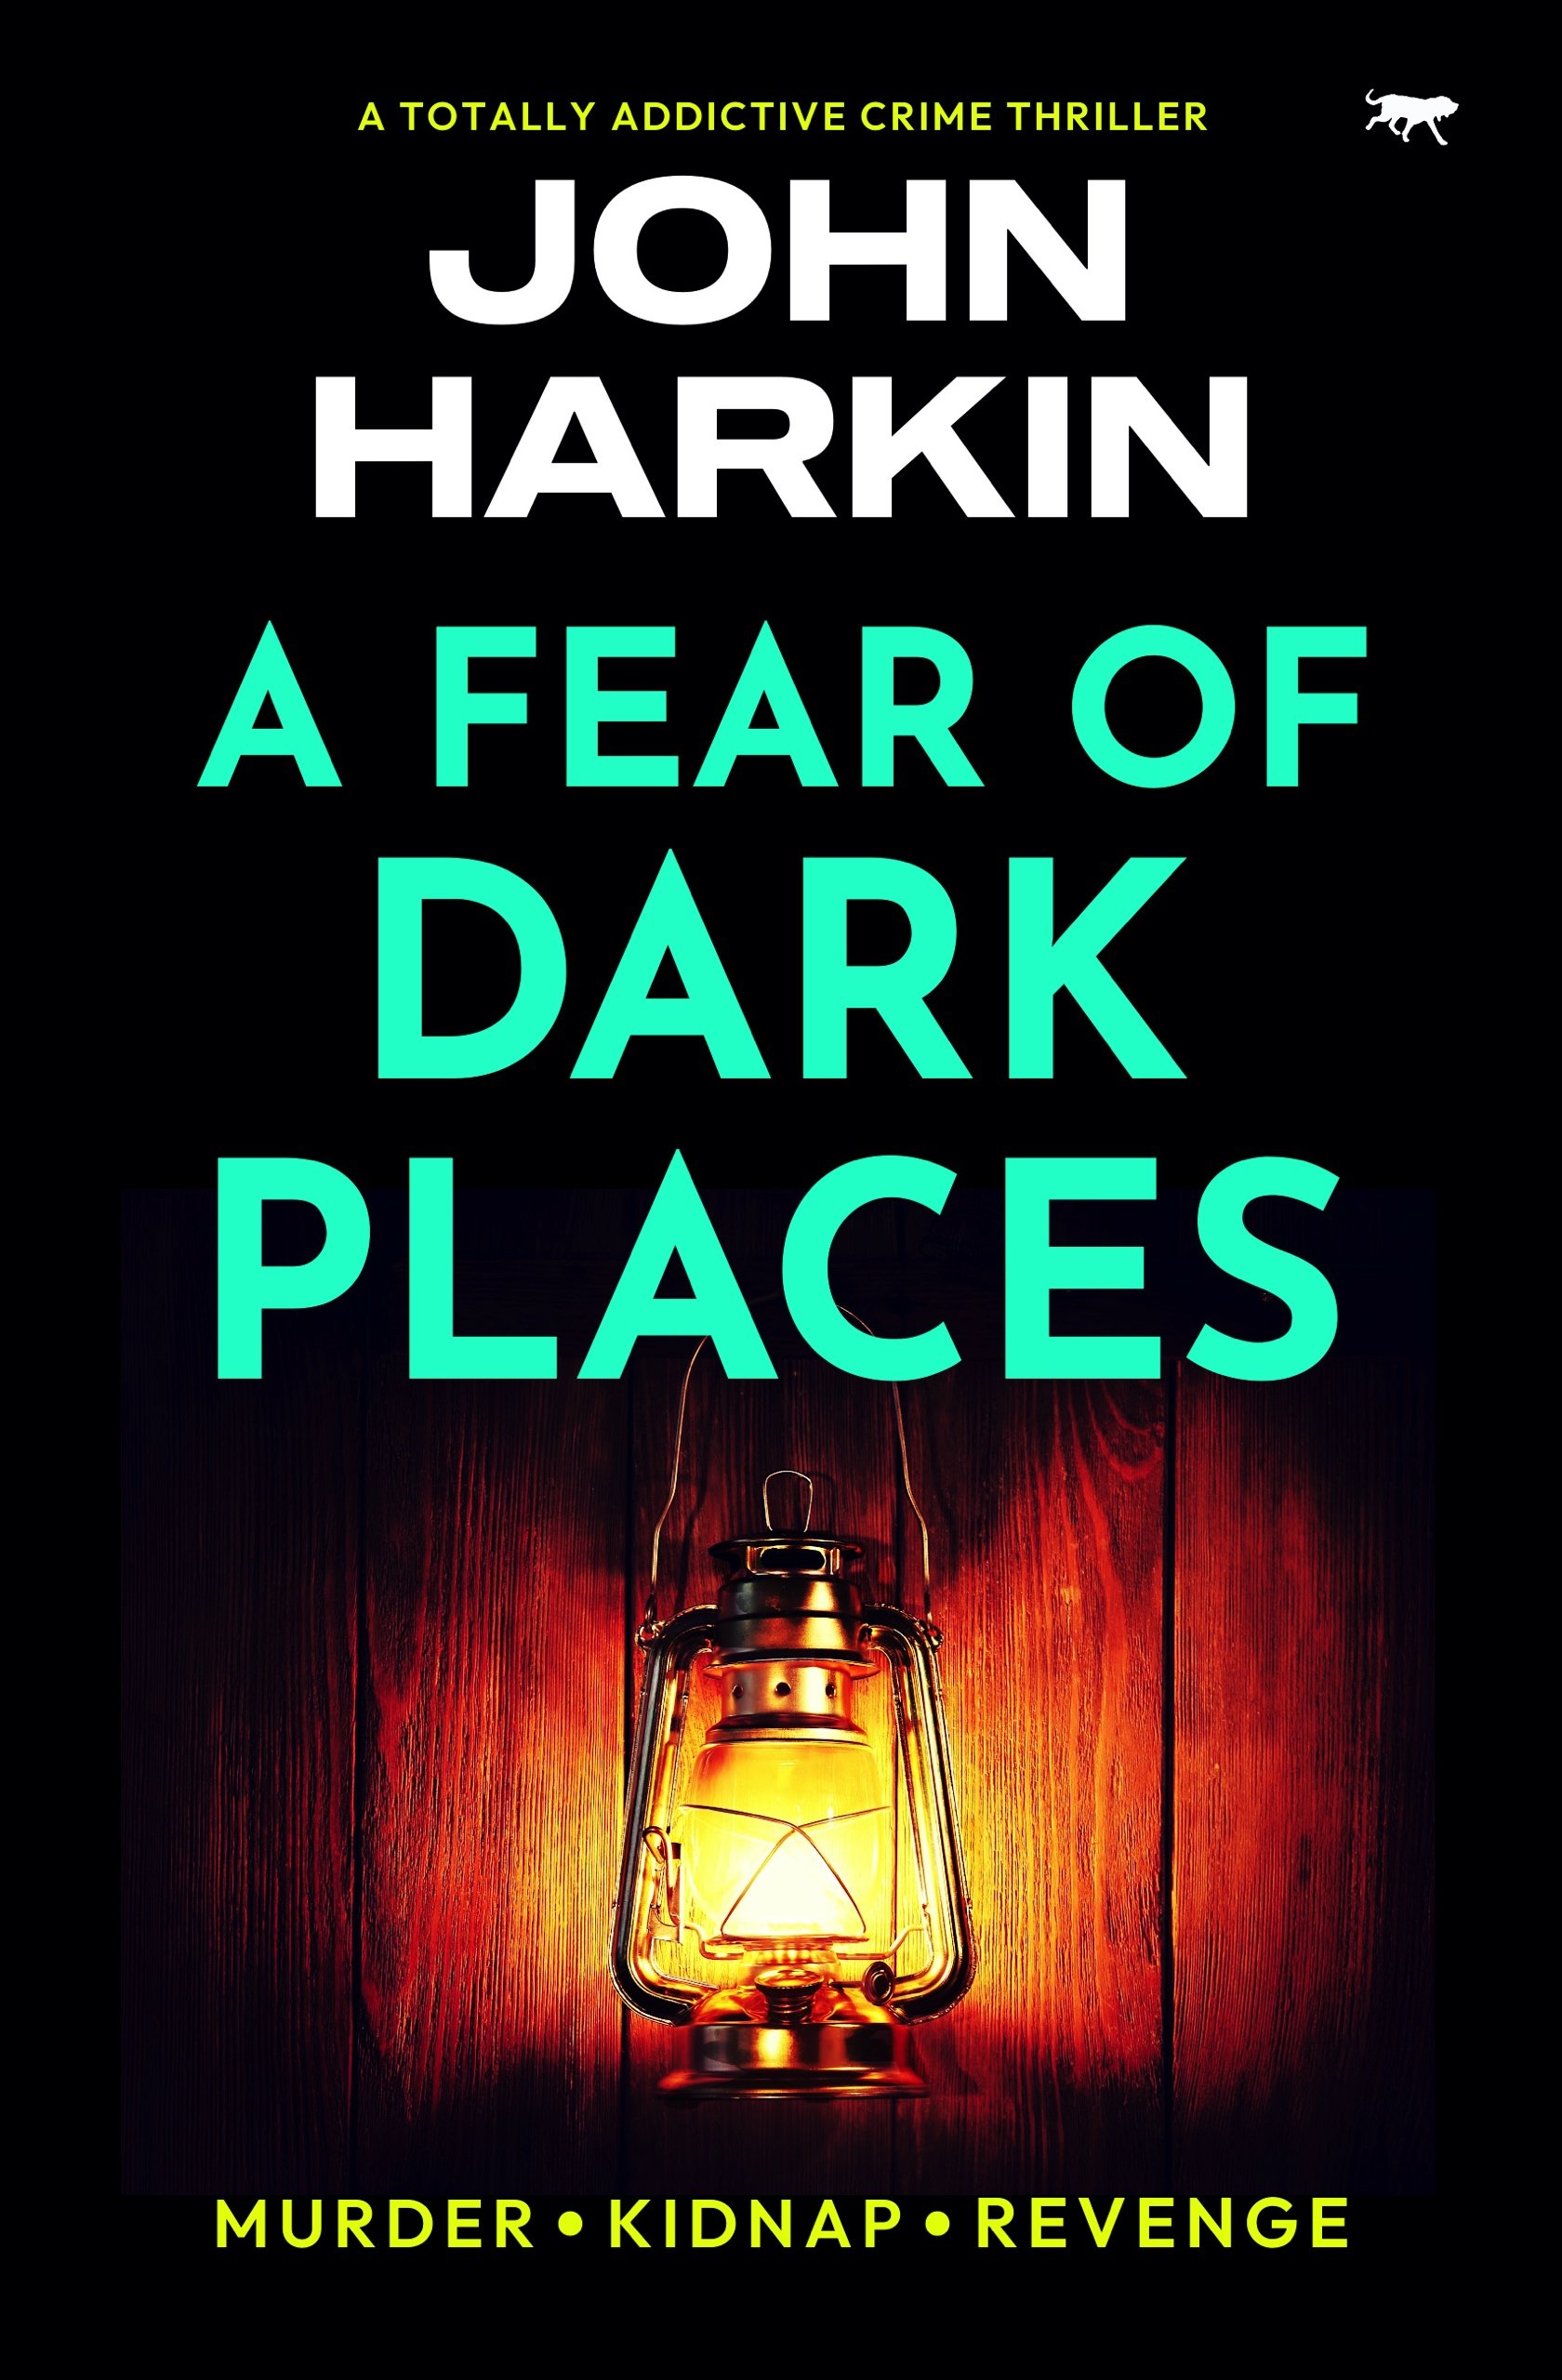 A-Fear-of-Dark-Places-Kindle.jpg